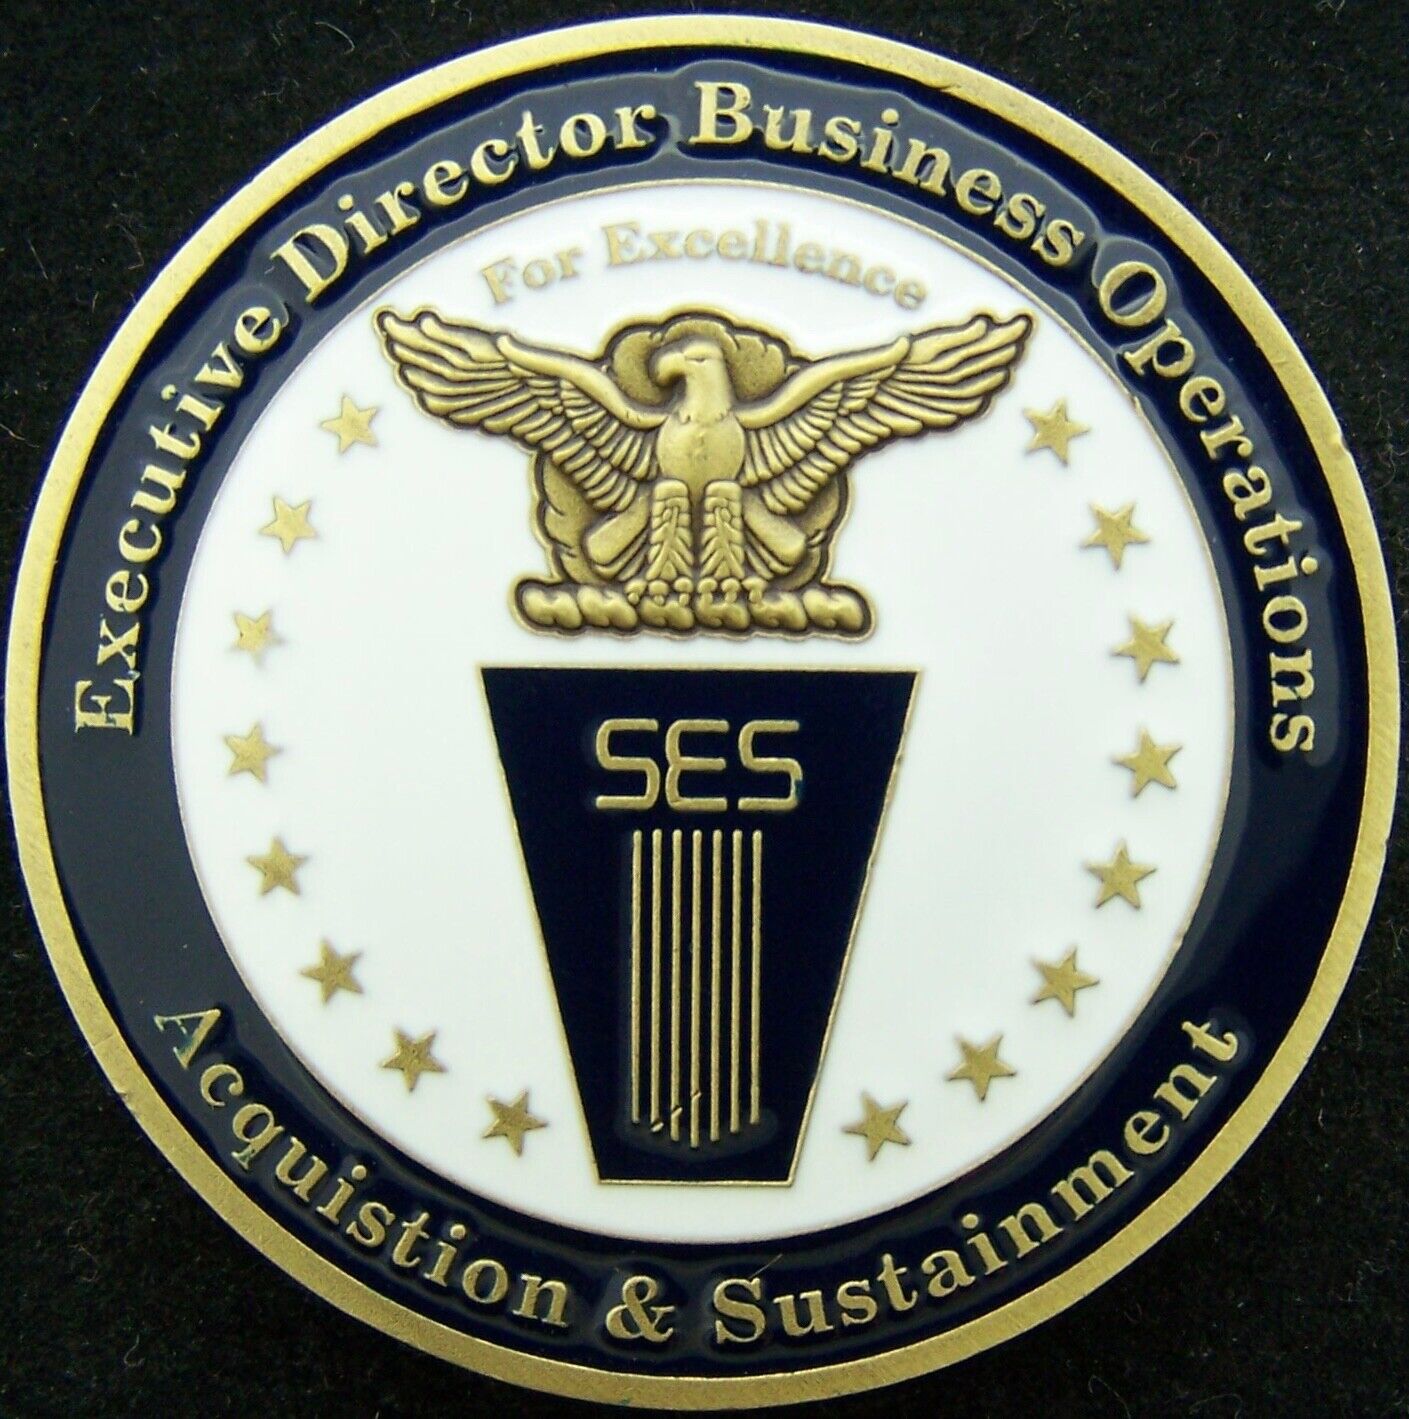 Executive Director Business Operations Acquisition & Sustainment Challenge Coin